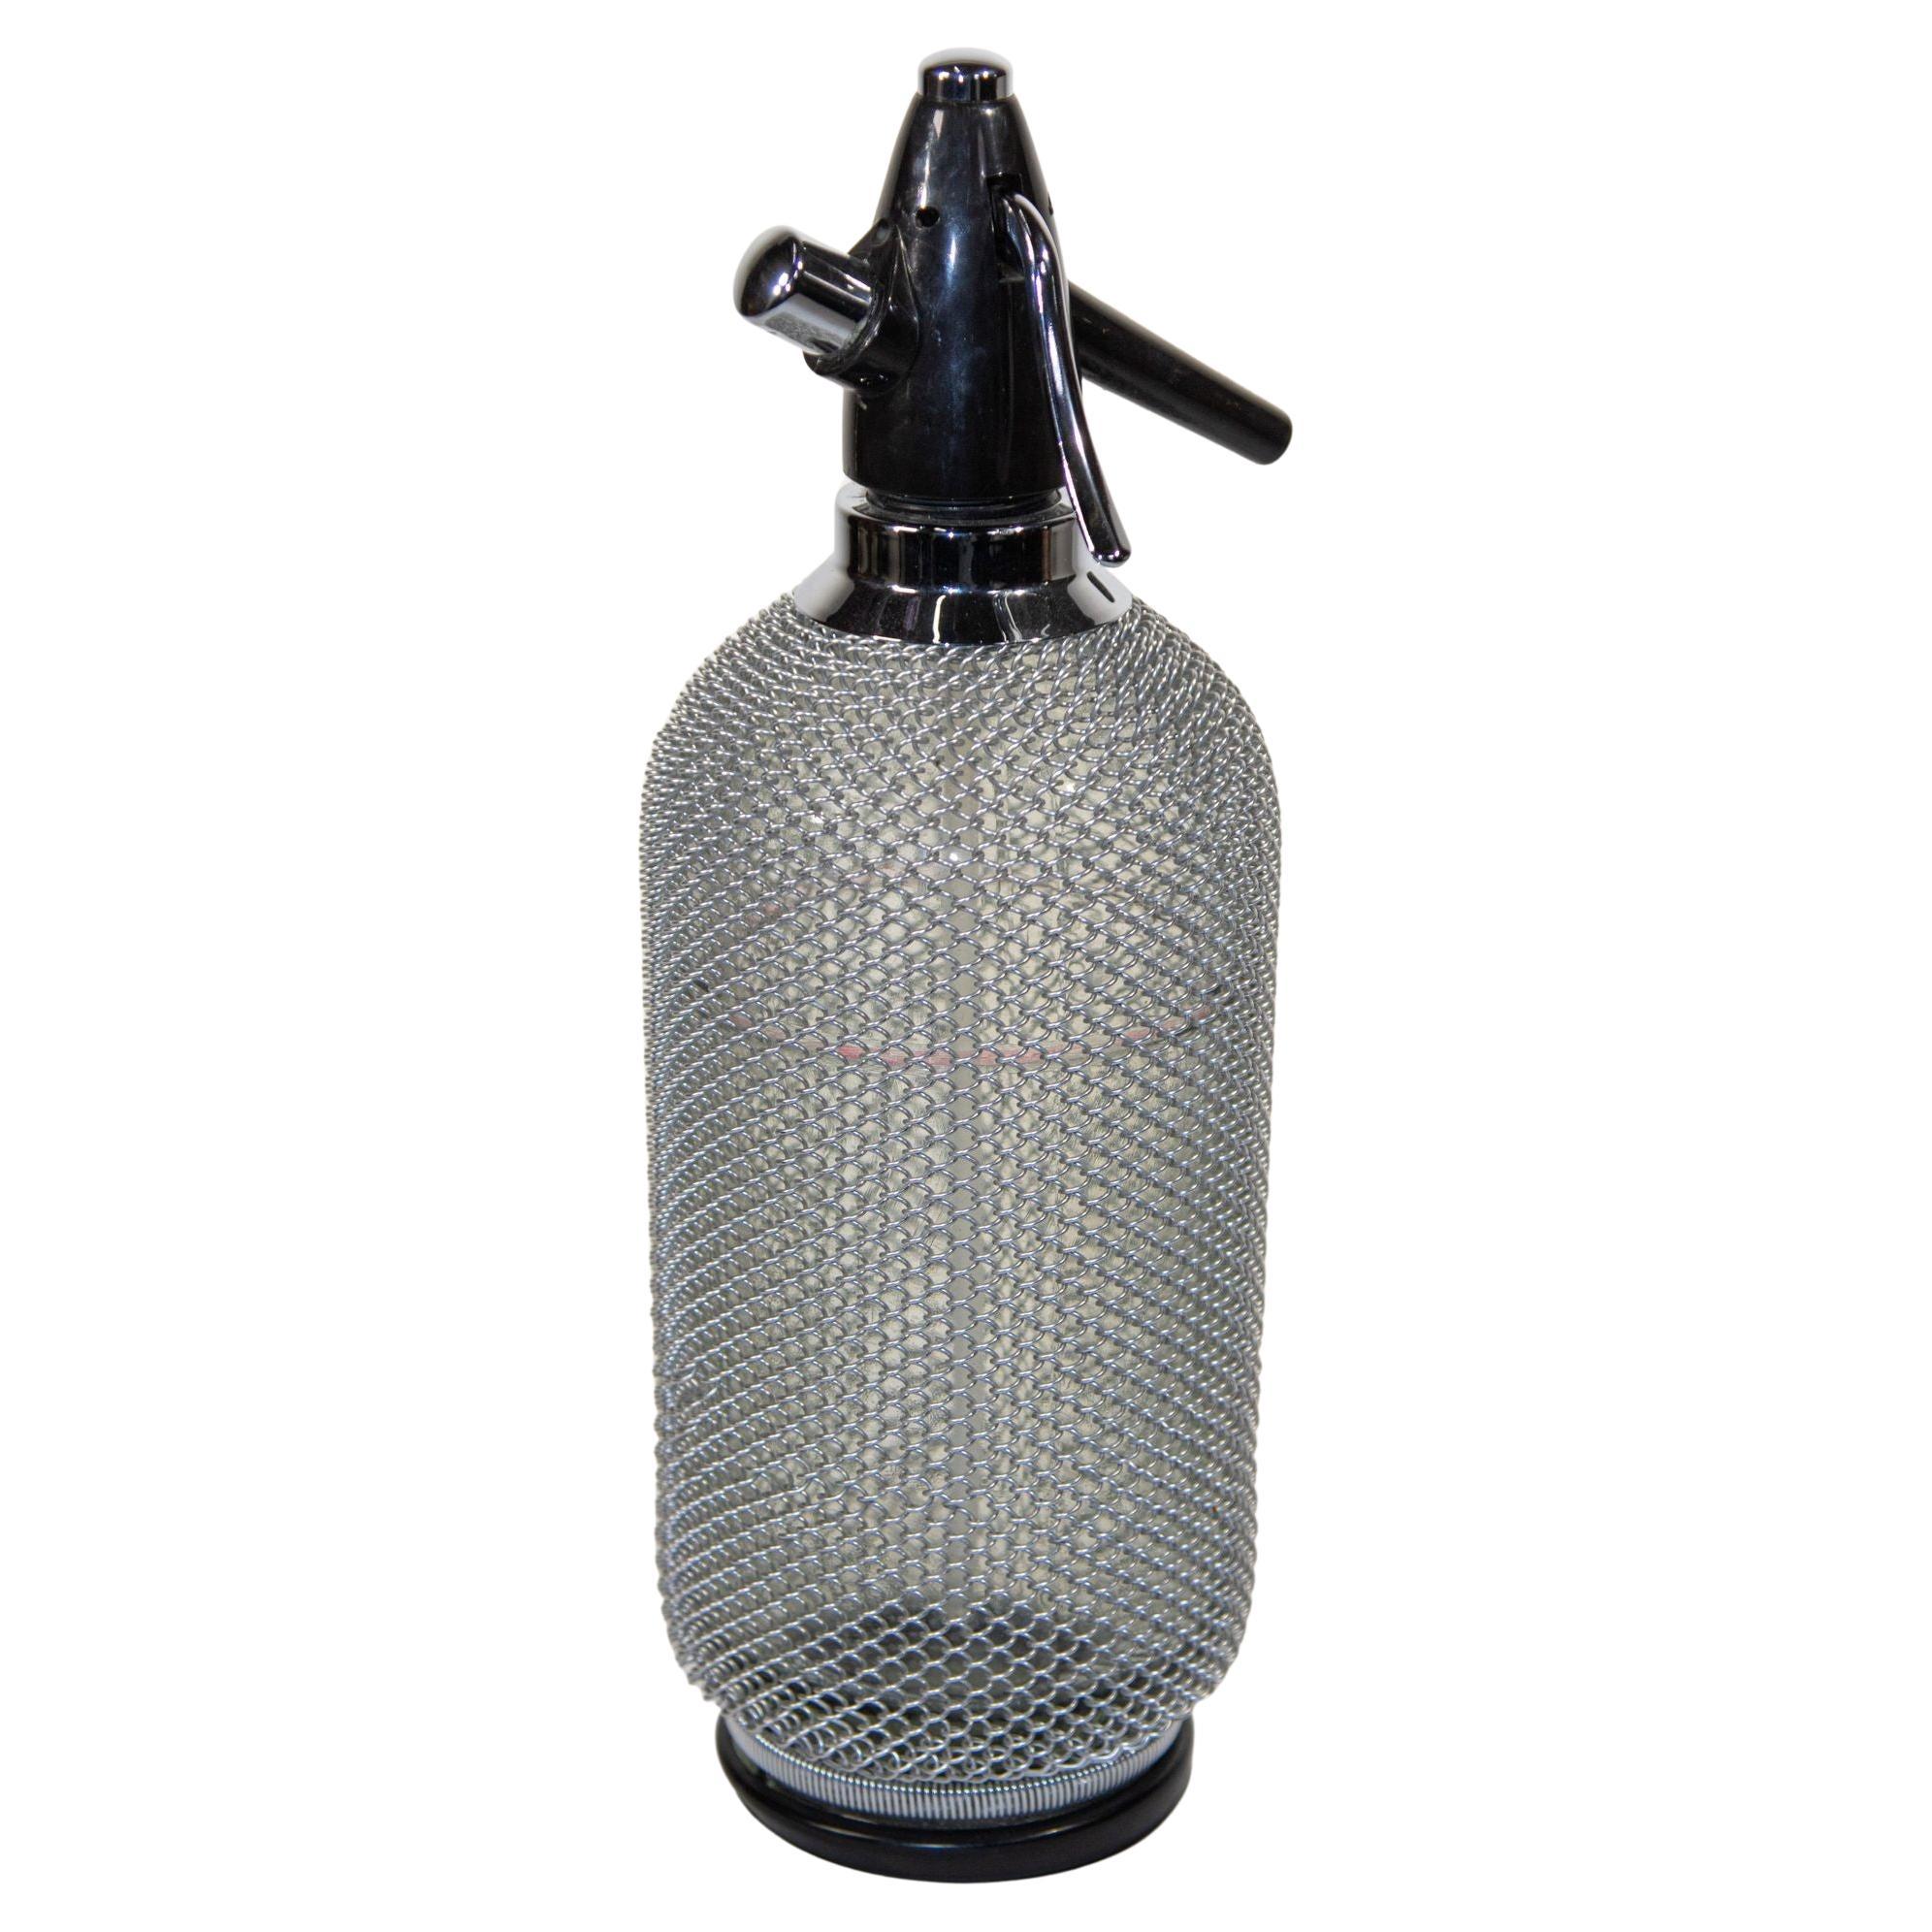 Vintage Classic Soda Siphon Seltzer Glass Bottle with Wire Mesh